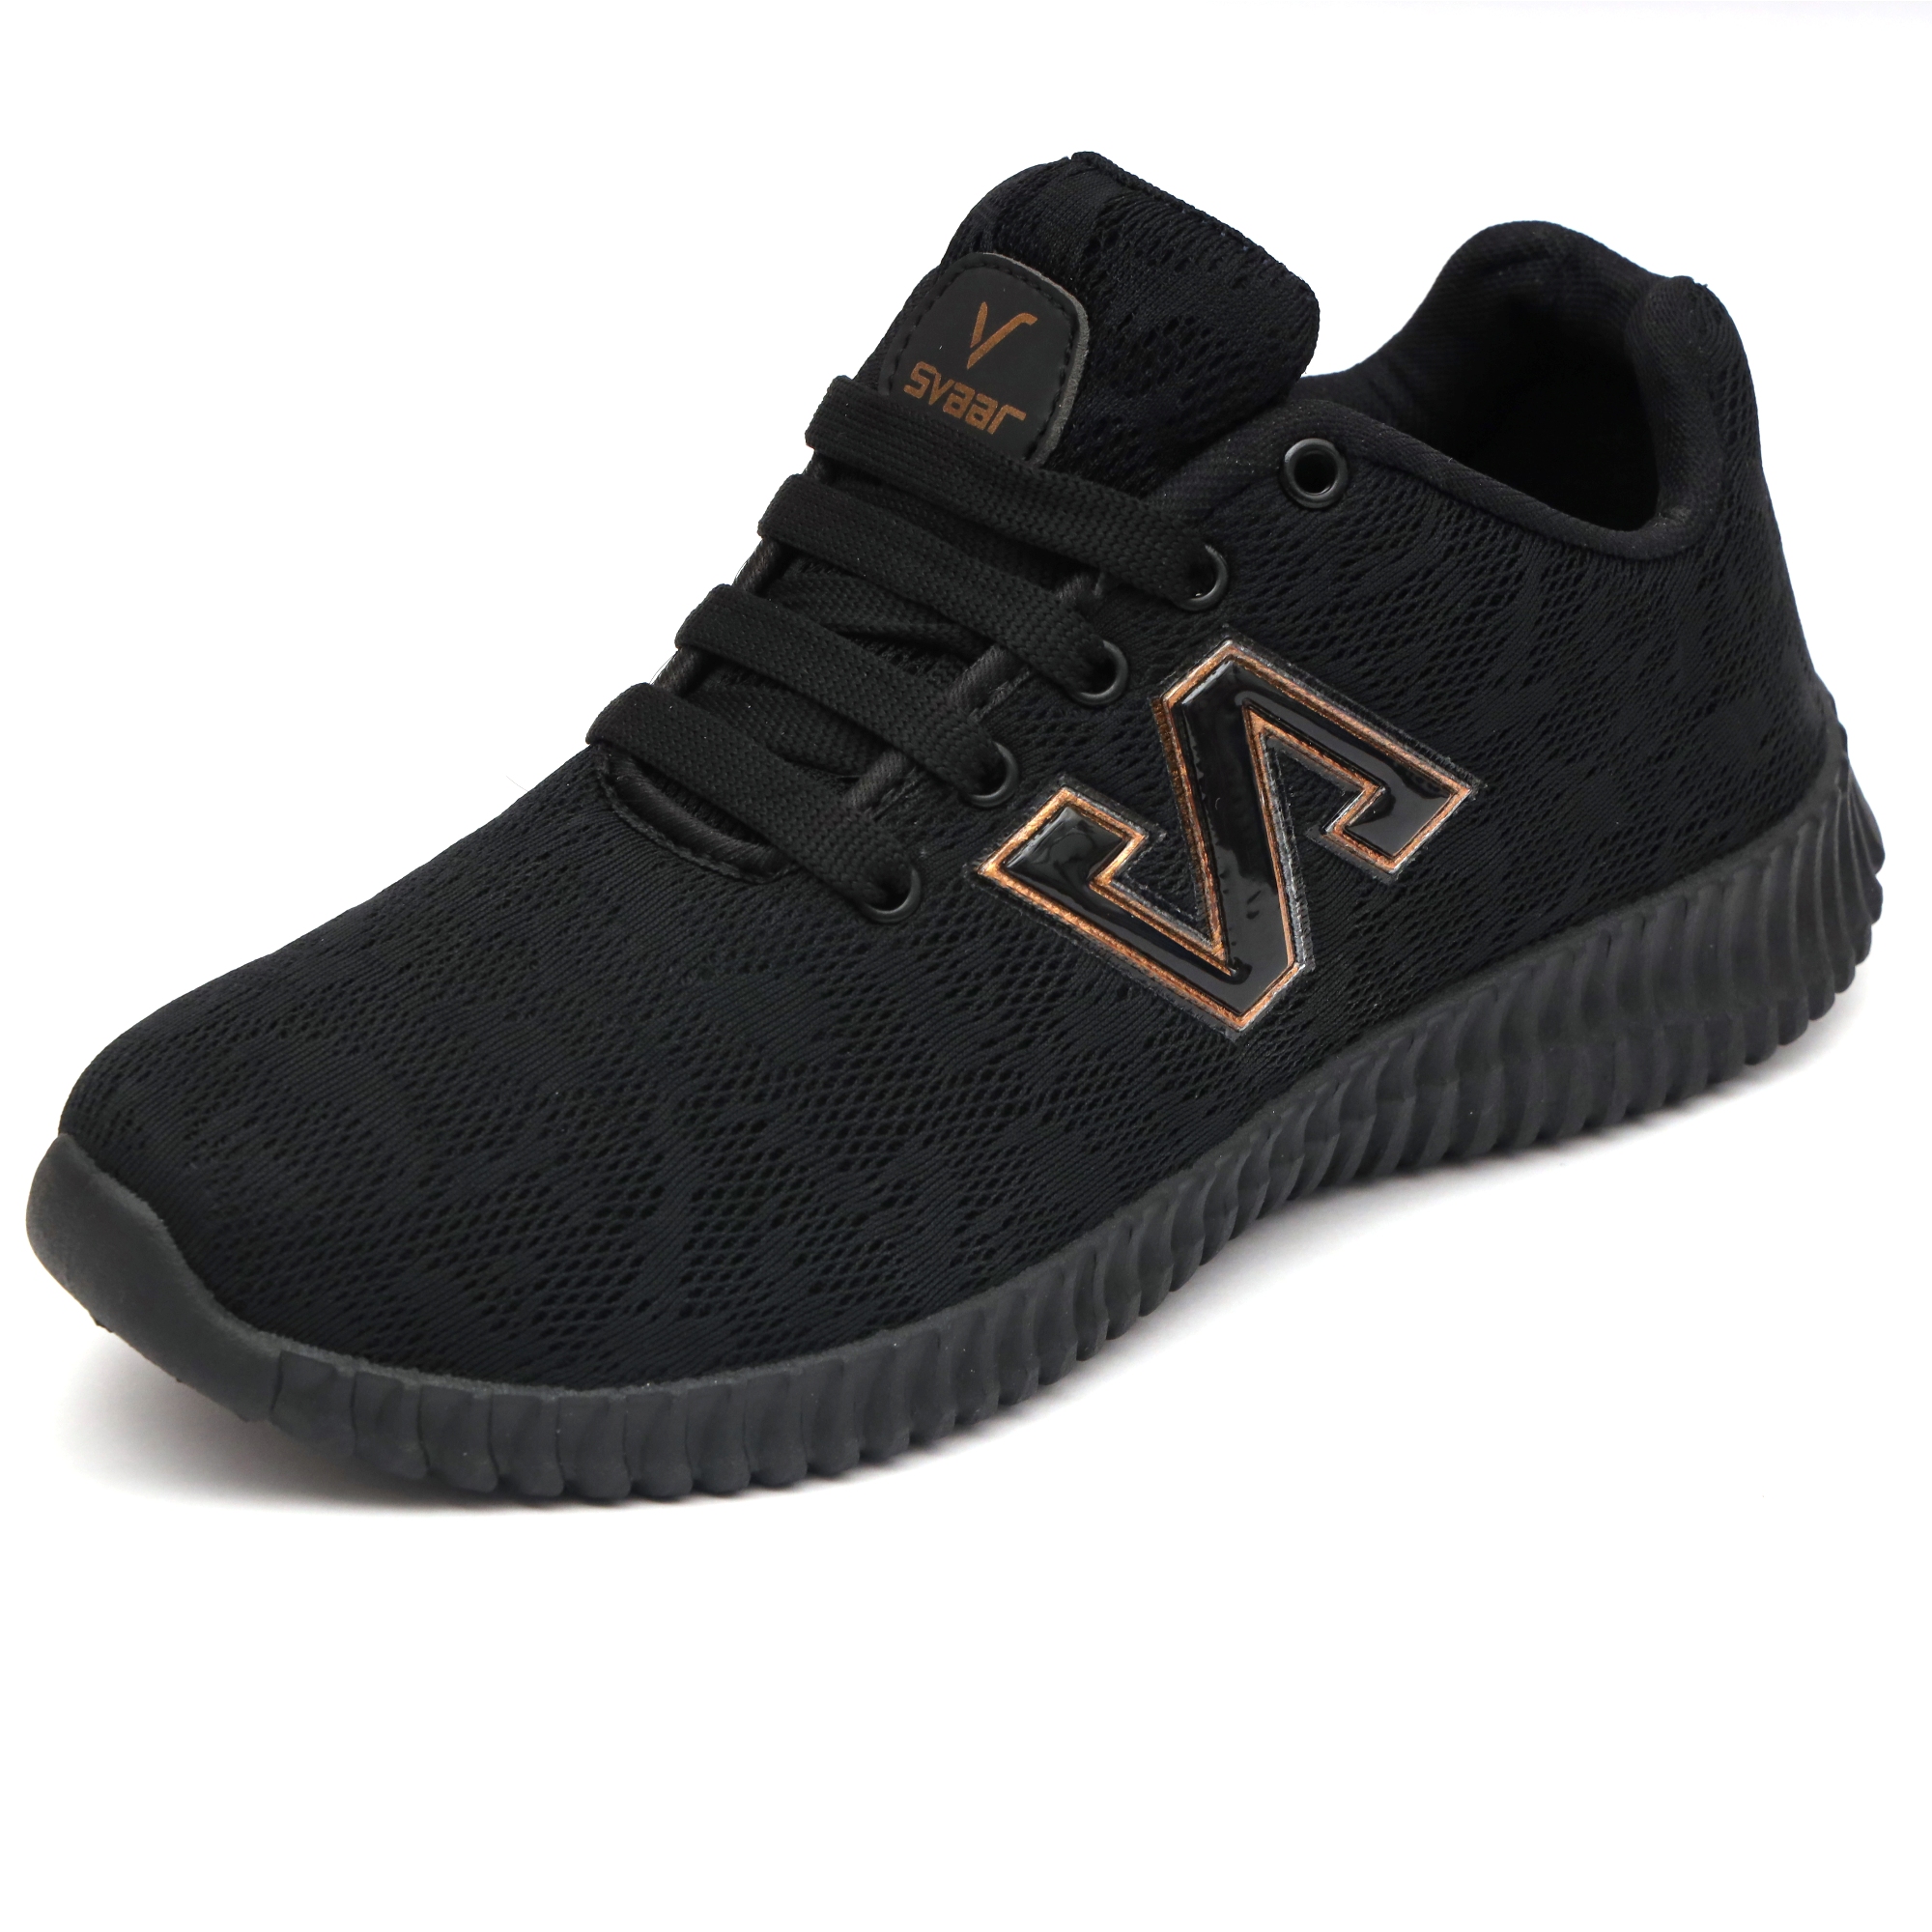 Buy Svaar Black and Gold Sports shoes for Men Online @ ₹509 from ShopClues